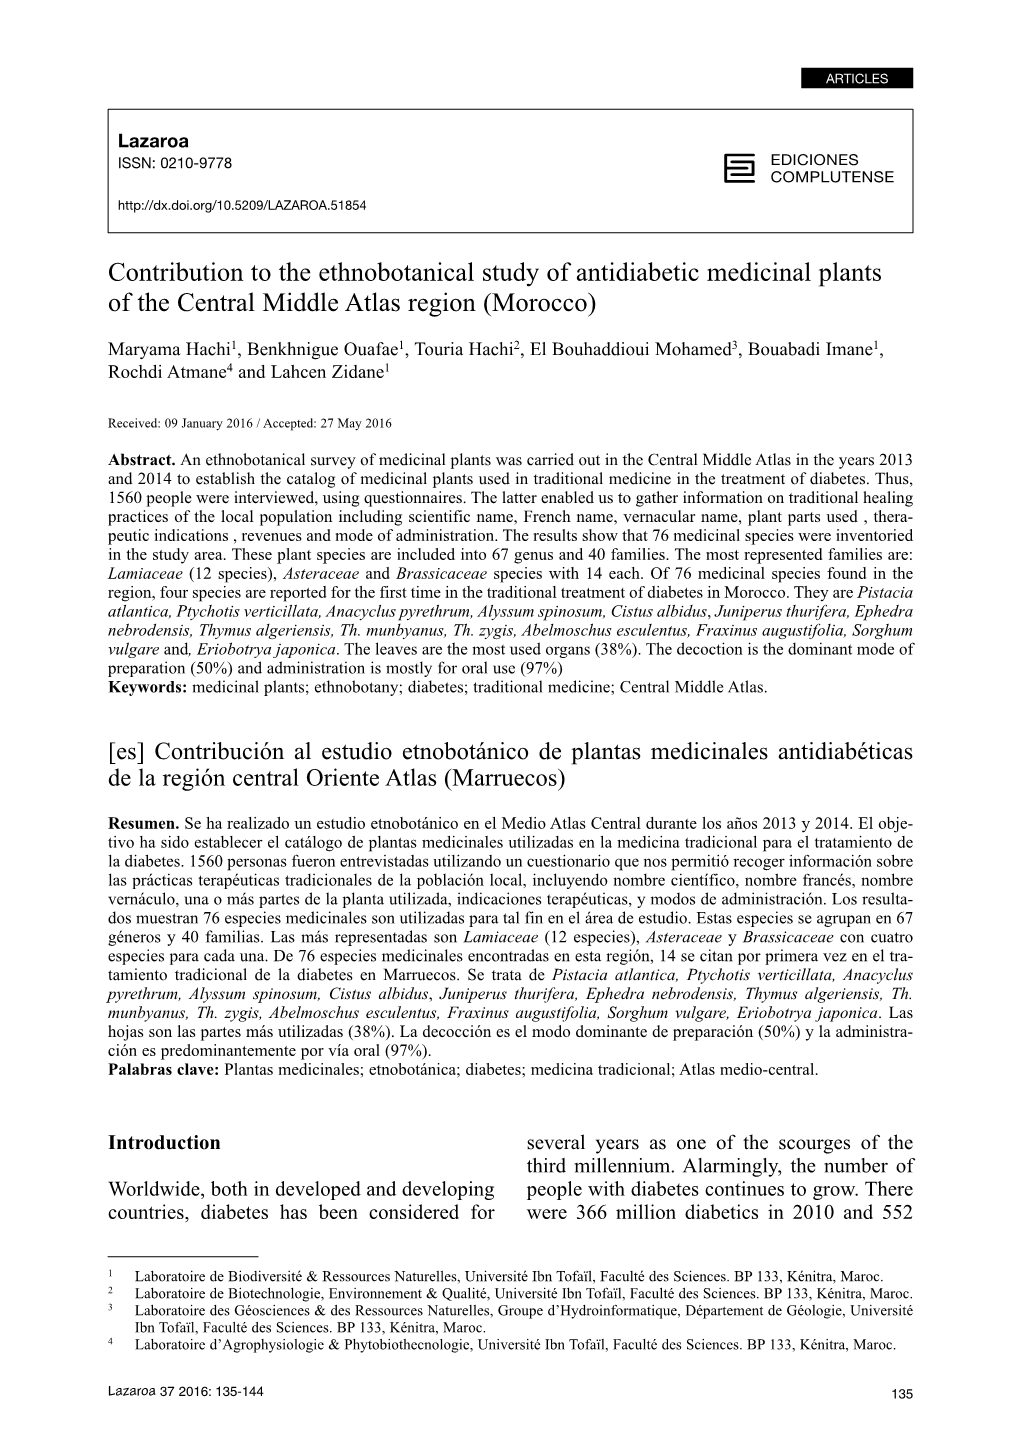 Contribution to the Ethnobotanical Study of Antidiabetic Medicinal Plants of the Central Middle Atlas Region (Morocco)